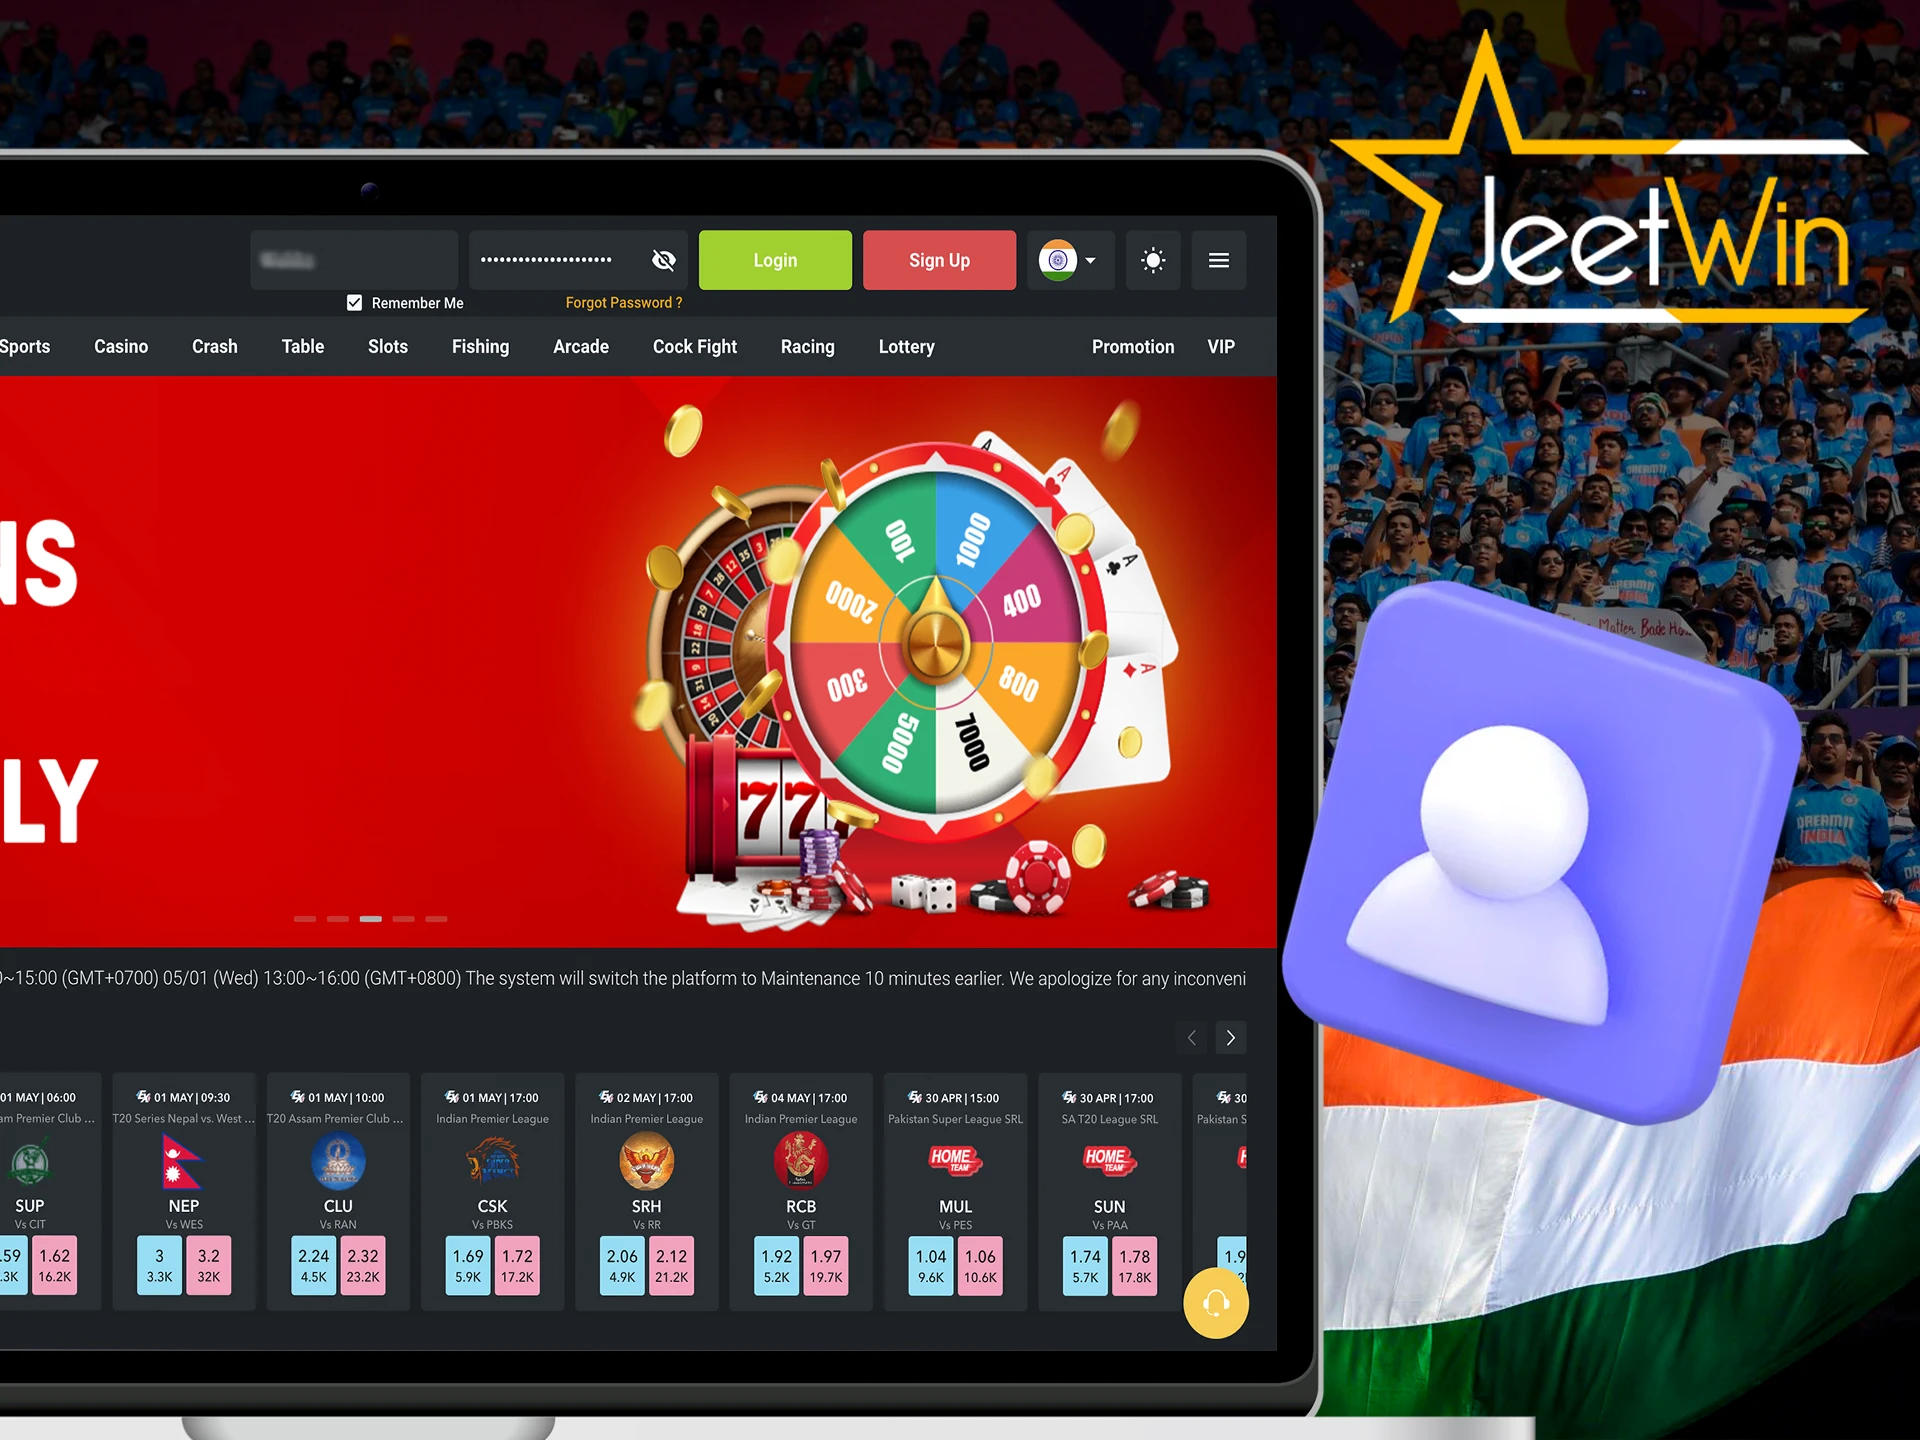 Log in to your account at JeetWin Casino.